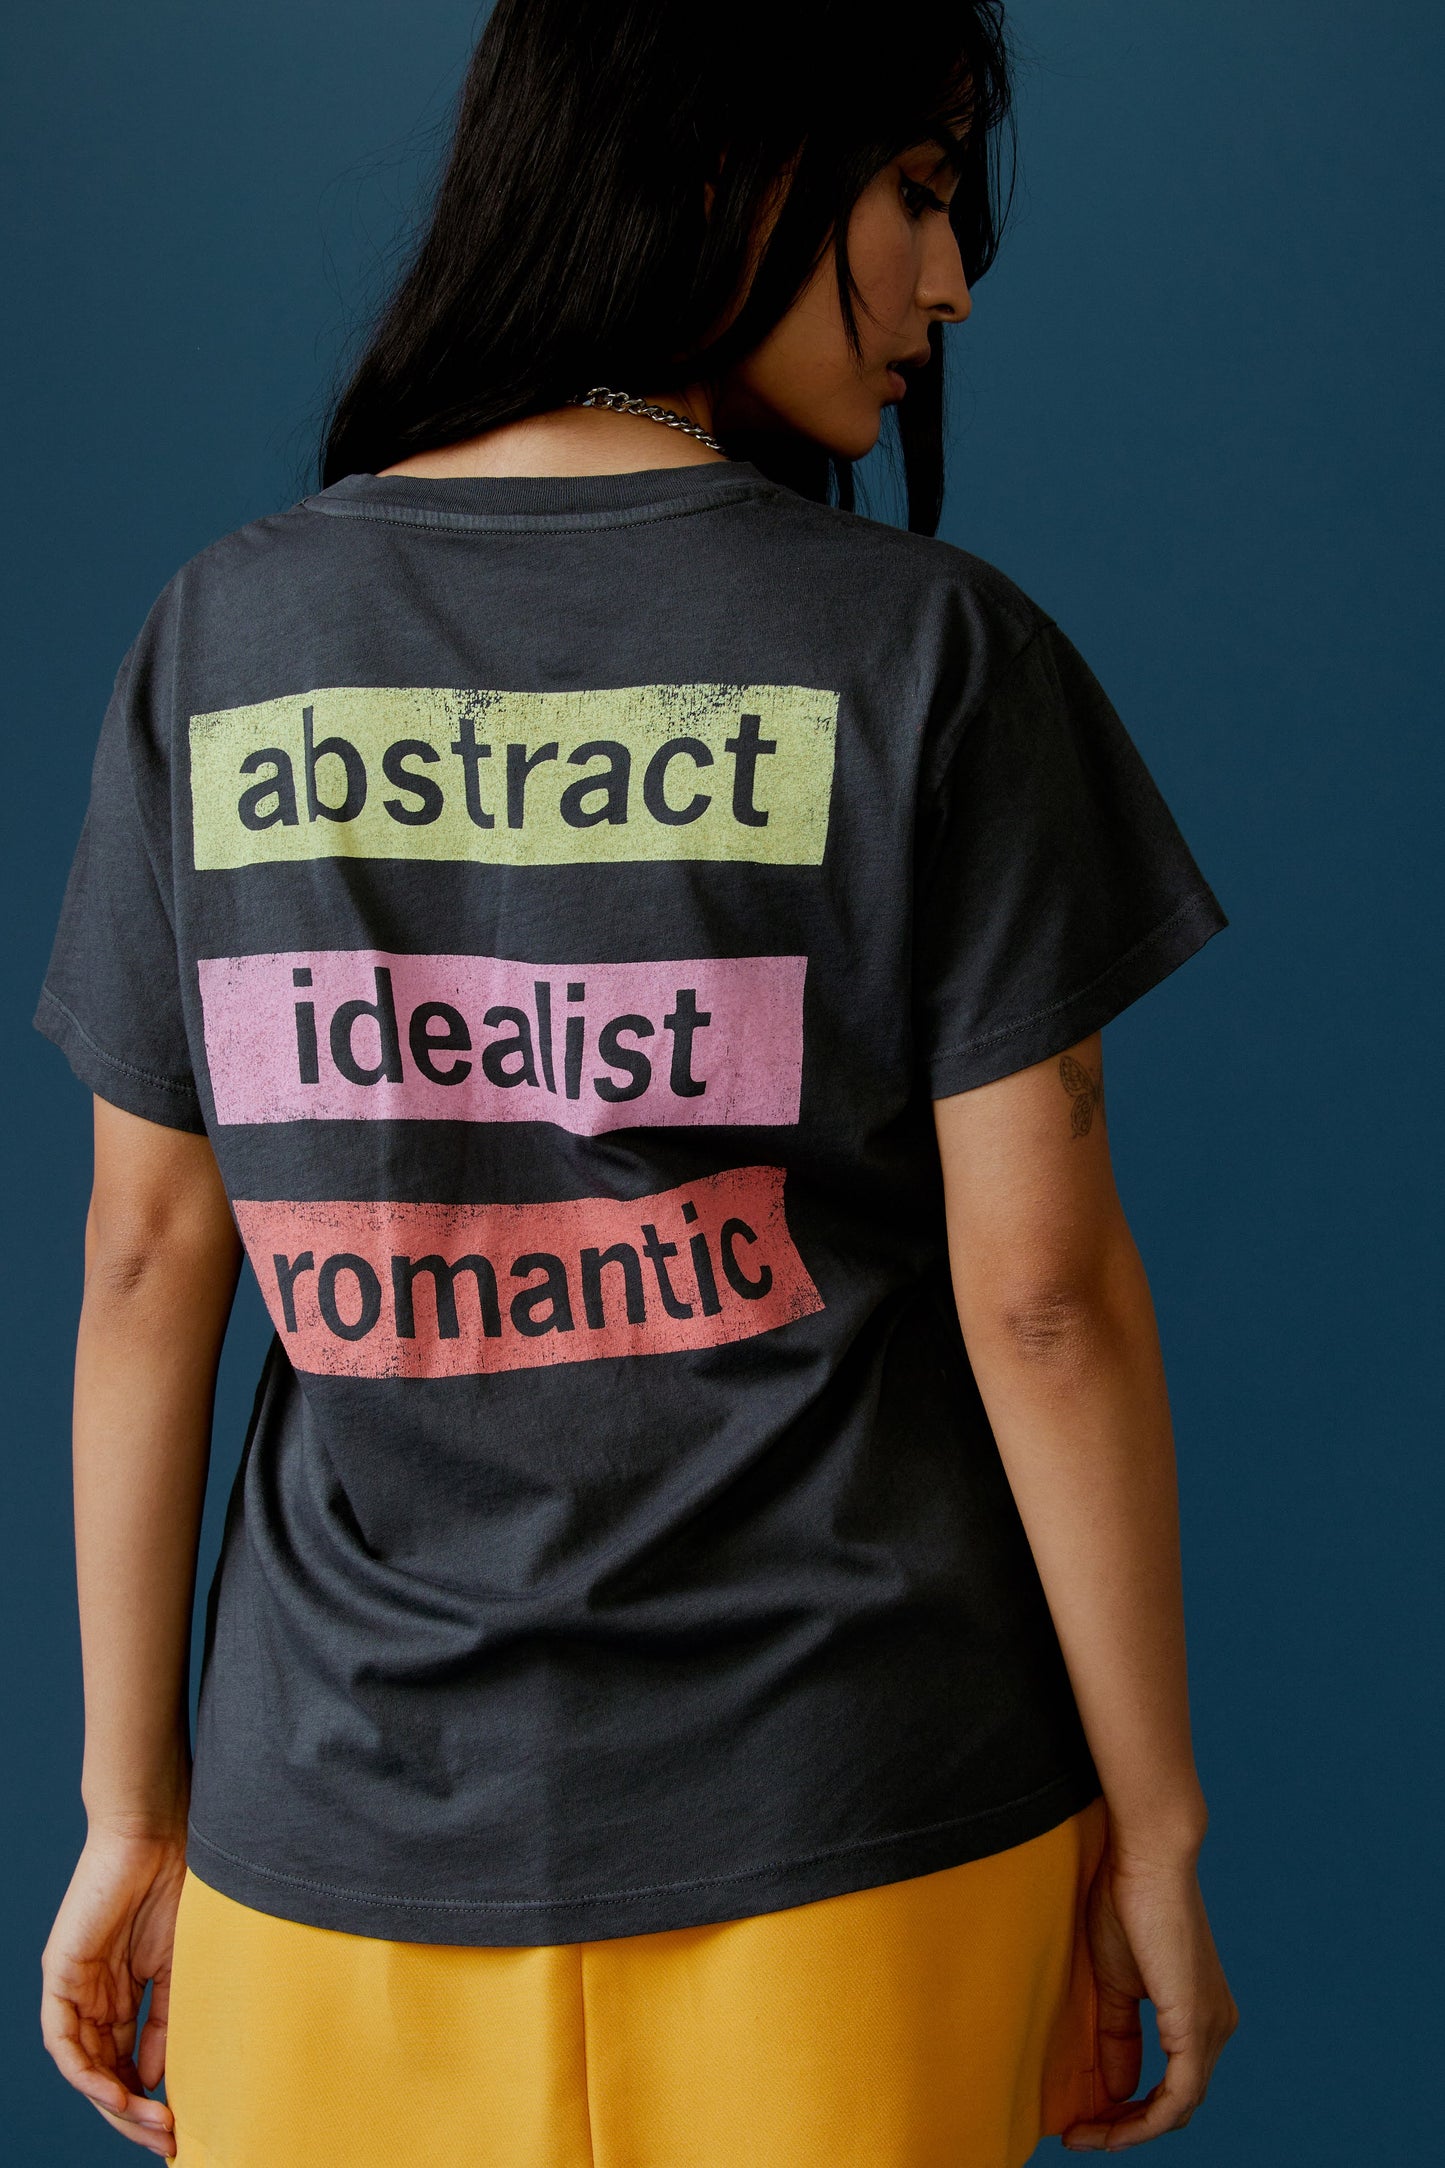 A dark-haired model featuring a black tee stamped with 'Duran Duran' in front and 'abstract', 'idealist', and 'romantic' at the back.